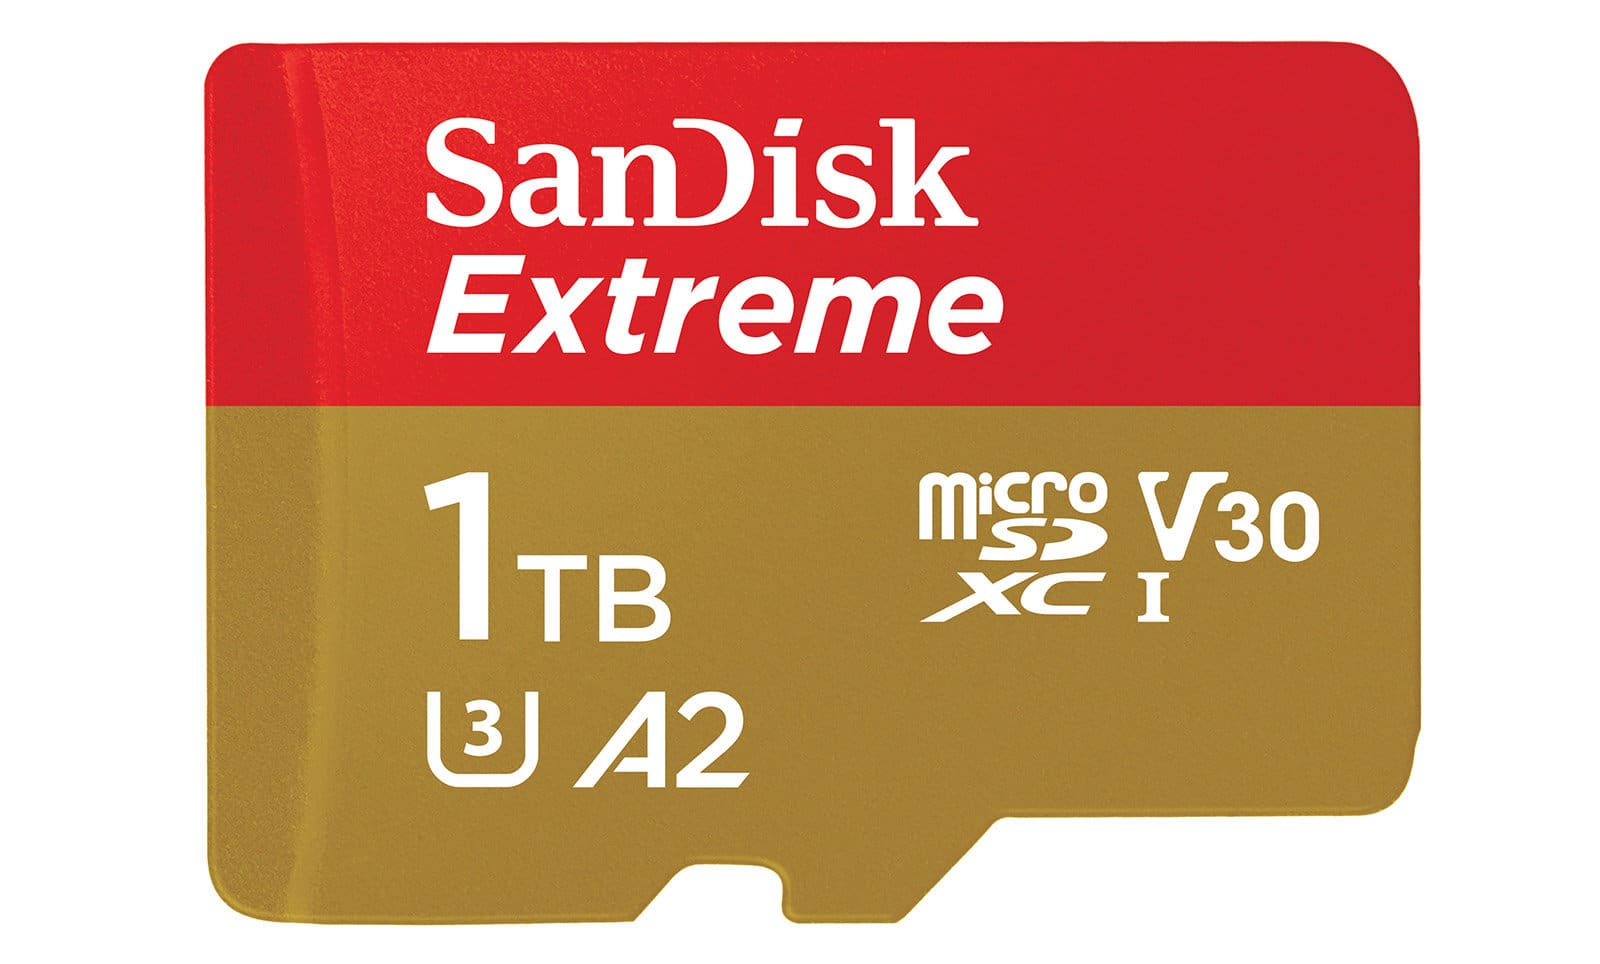 micron and western digital reveal 1tb microsd cards